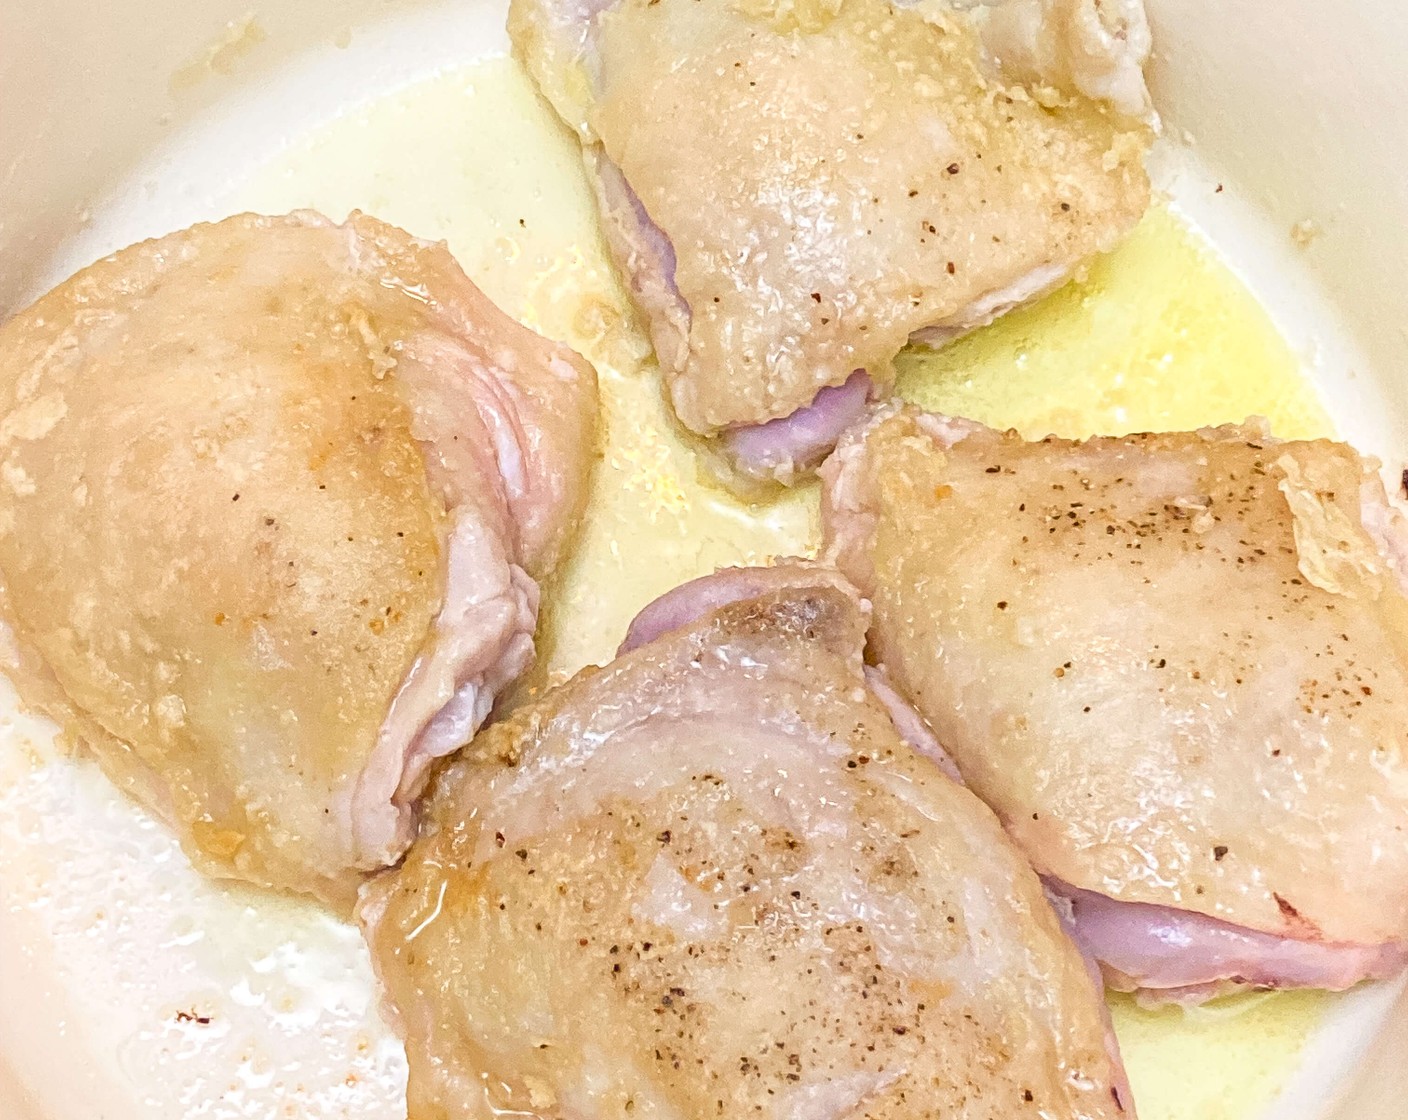 step 2 Heat Olive Oil (2 Tbsp) in a large Dutch oven or pot over high heat, or set Instant Pot to sauté on high. Once the oil is hot, add chicken thighs and brown on both sides, about 2 minutes. Remove chicken thighs from the pot and place them on a plate for later.